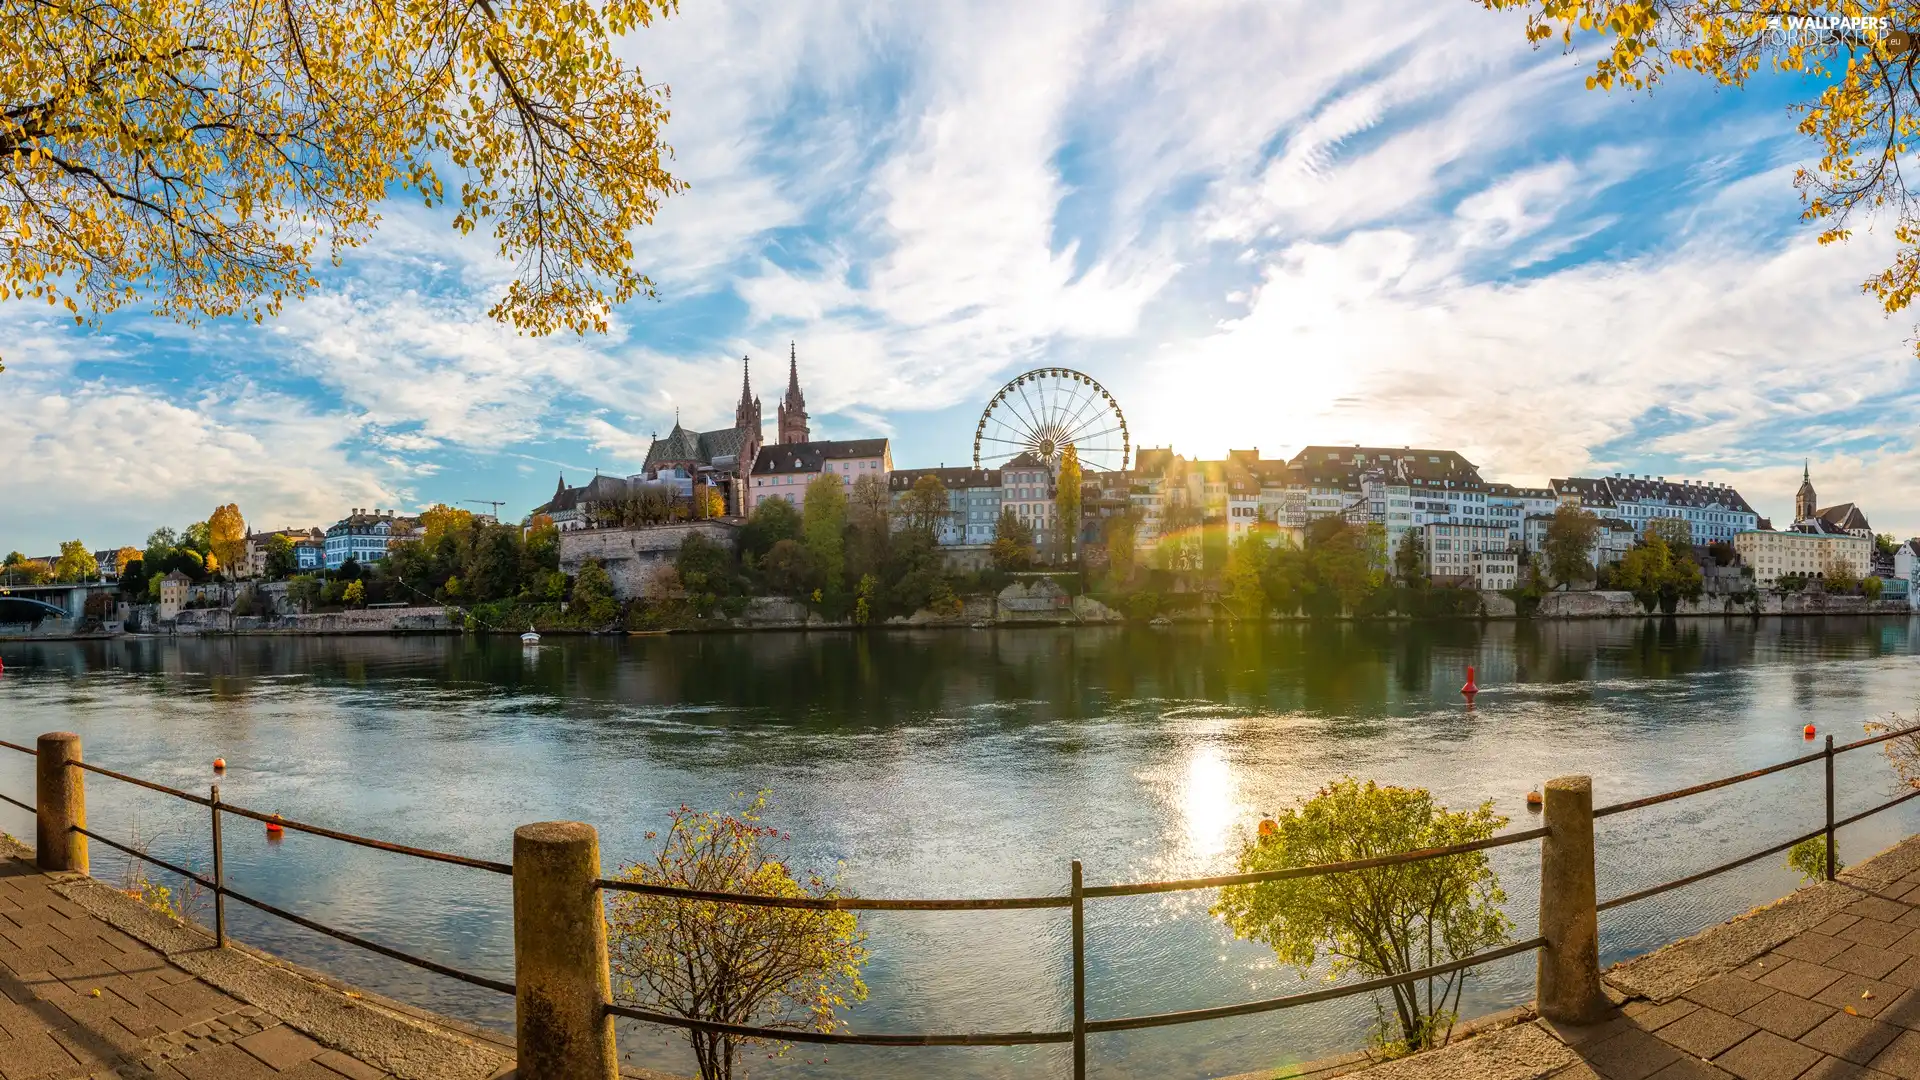 trees, Town, Rhine River, Sunrise, crash barrier, Switzerland, Basel, clouds, viewes, Houses